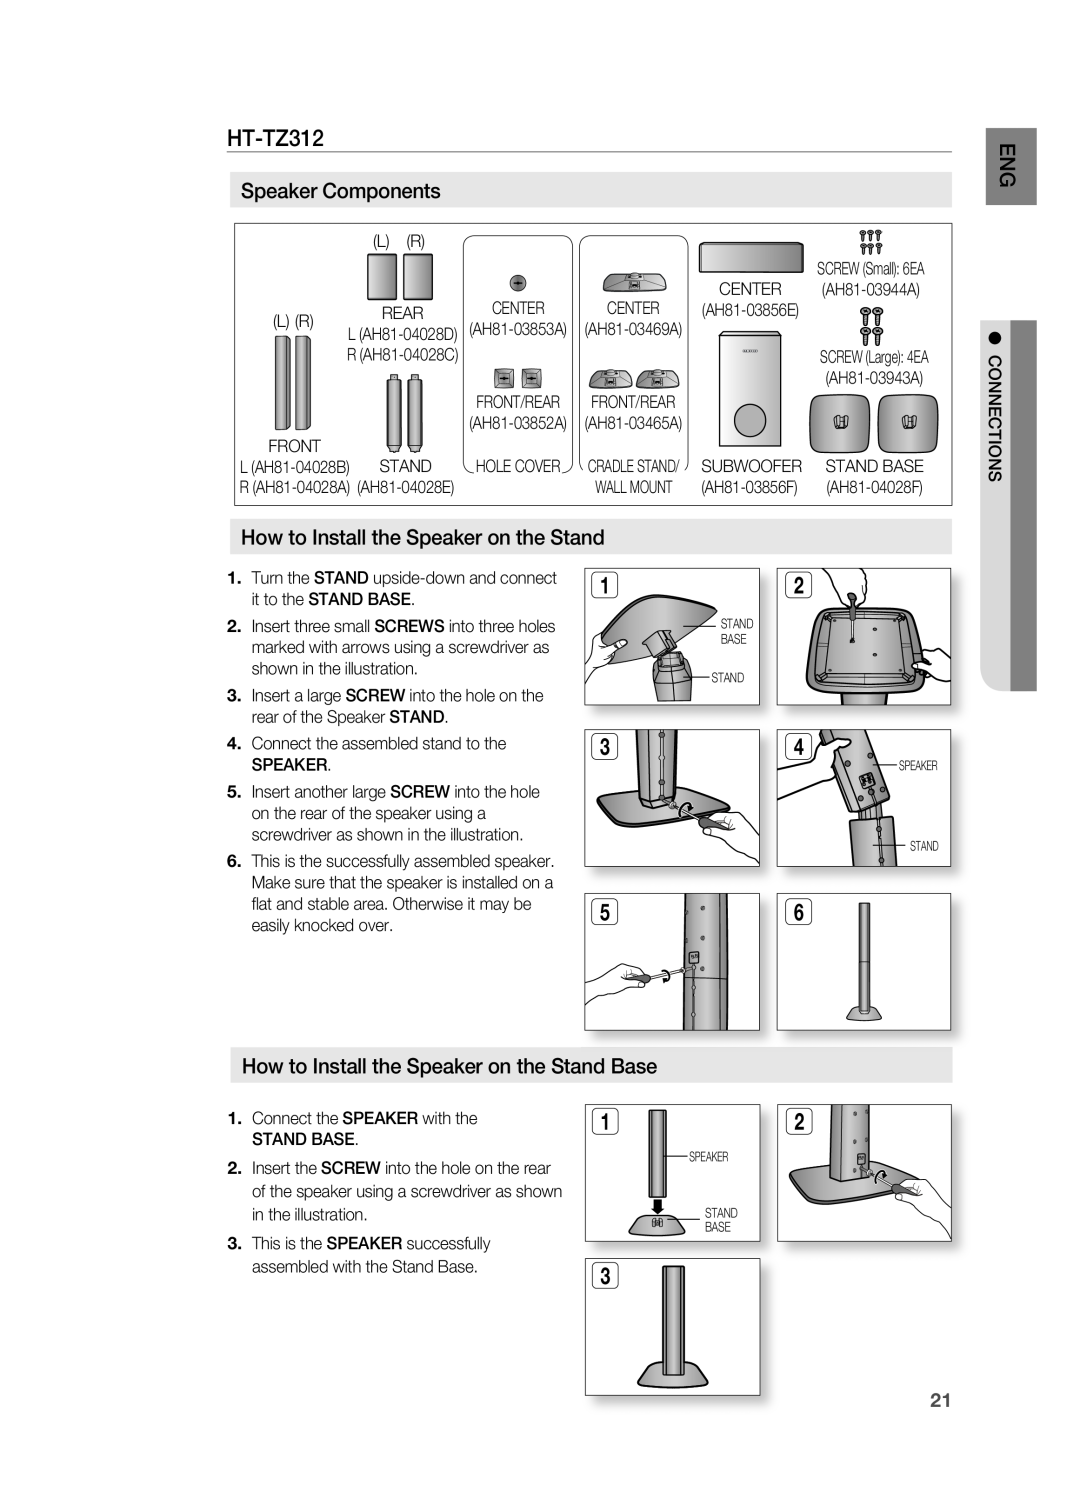 Samsung HT-TZ312 manual Ht-tZ312, How to install the Speaker on the Stand Base, Speaker Components 